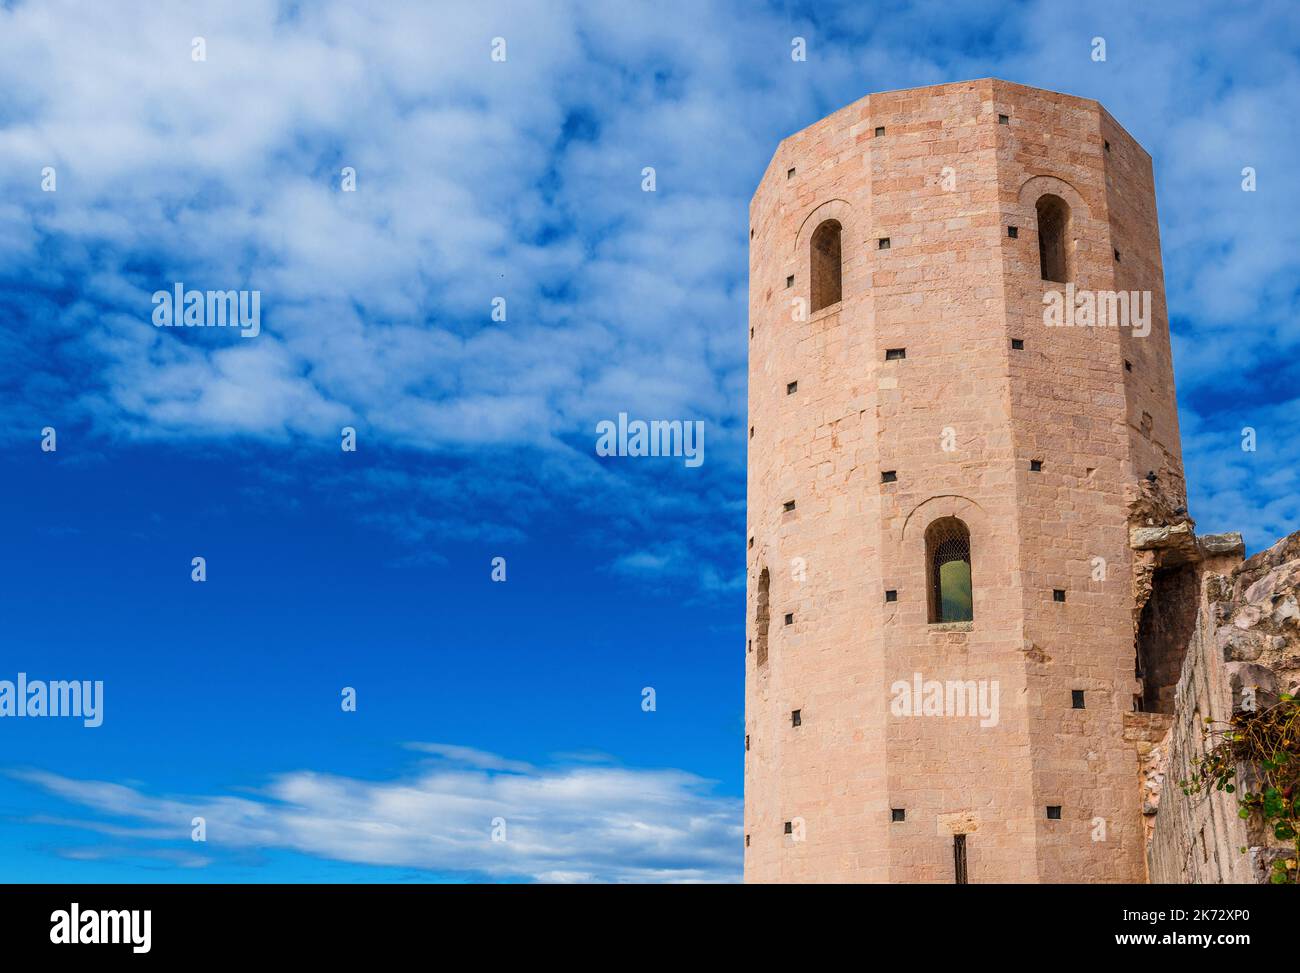 Porta Venere (Venus' Gate) ancient ruins in Spello, with its beautiful dodecagonal tower among white clouds Stock Photo